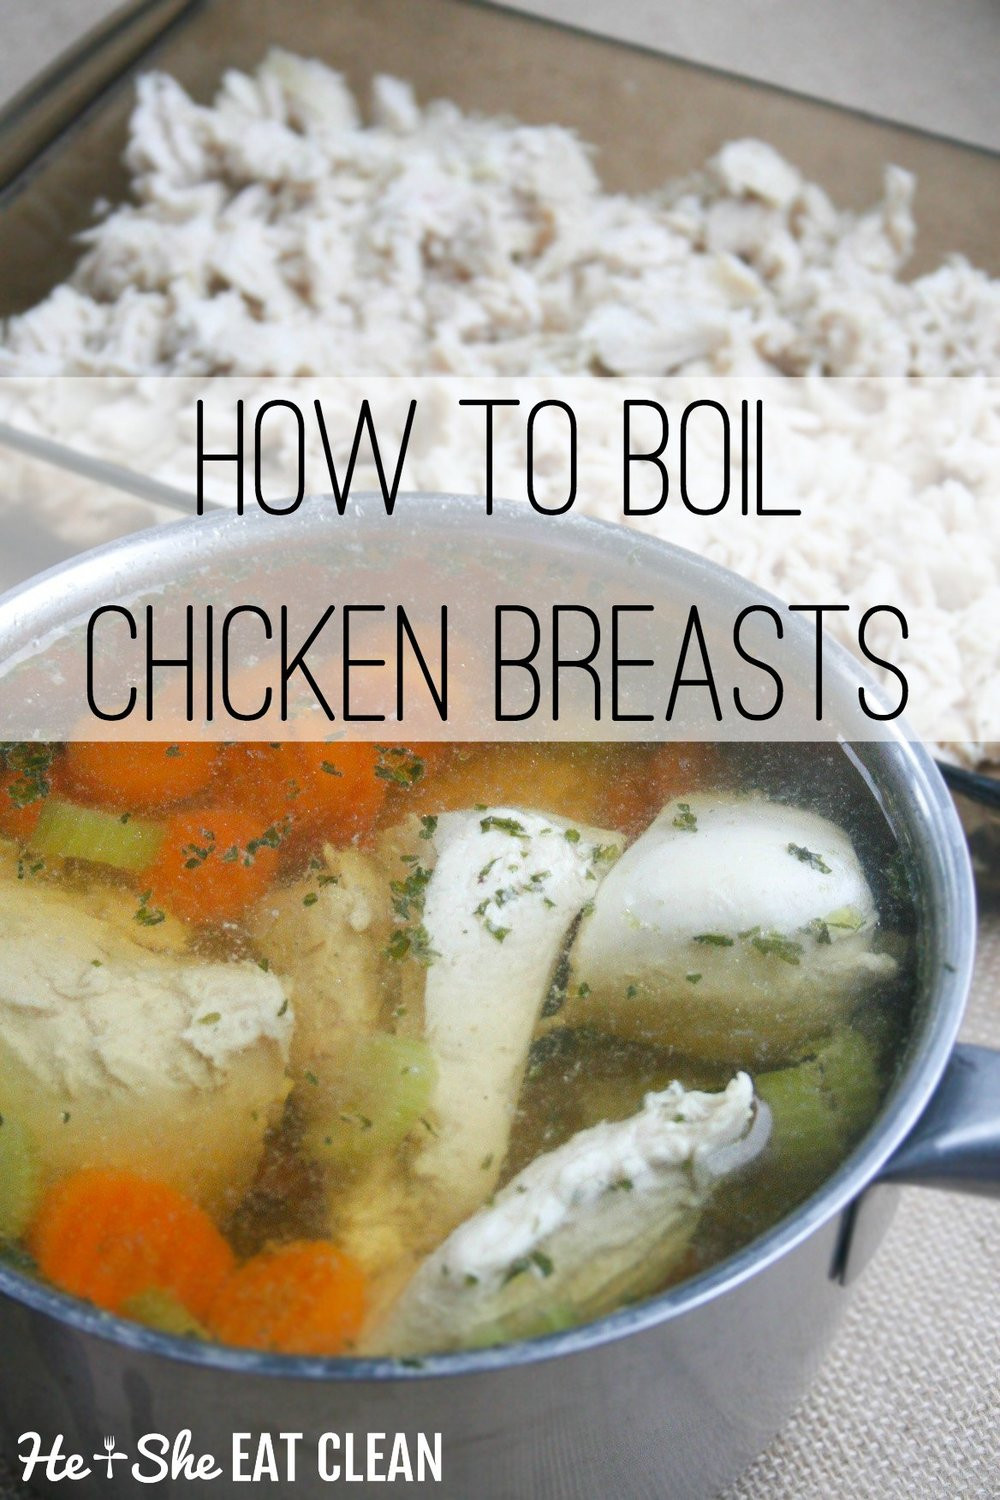 Boiling Chicken Breasts
 How to Boil Chicken Breasts